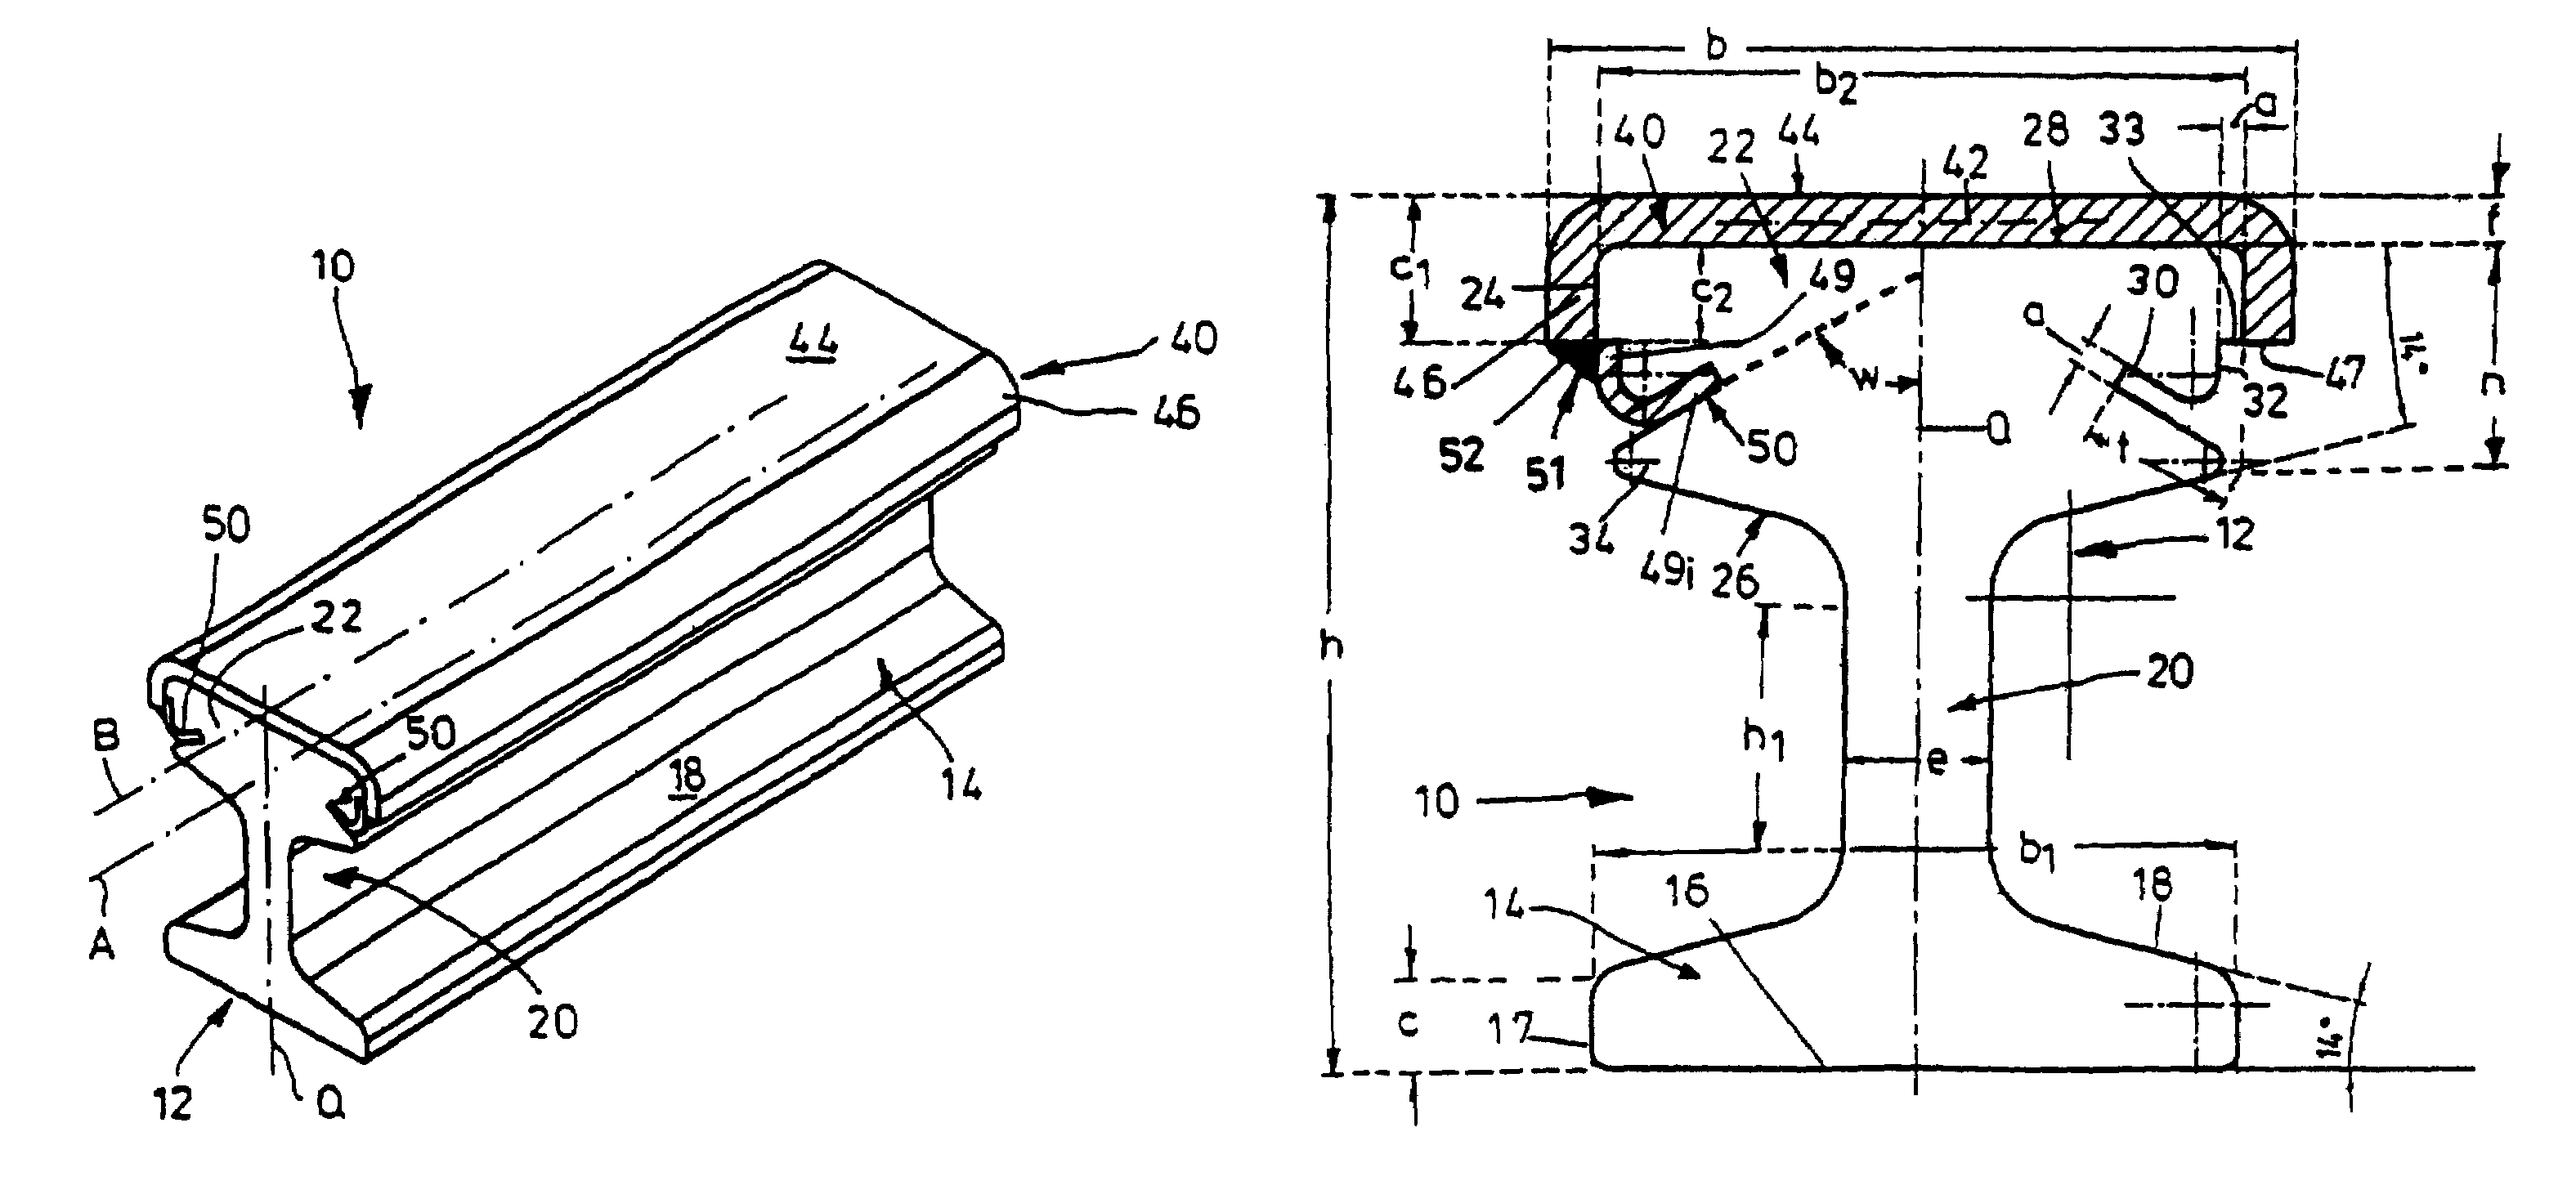 Composite profile and method for manufacturing the composite profile